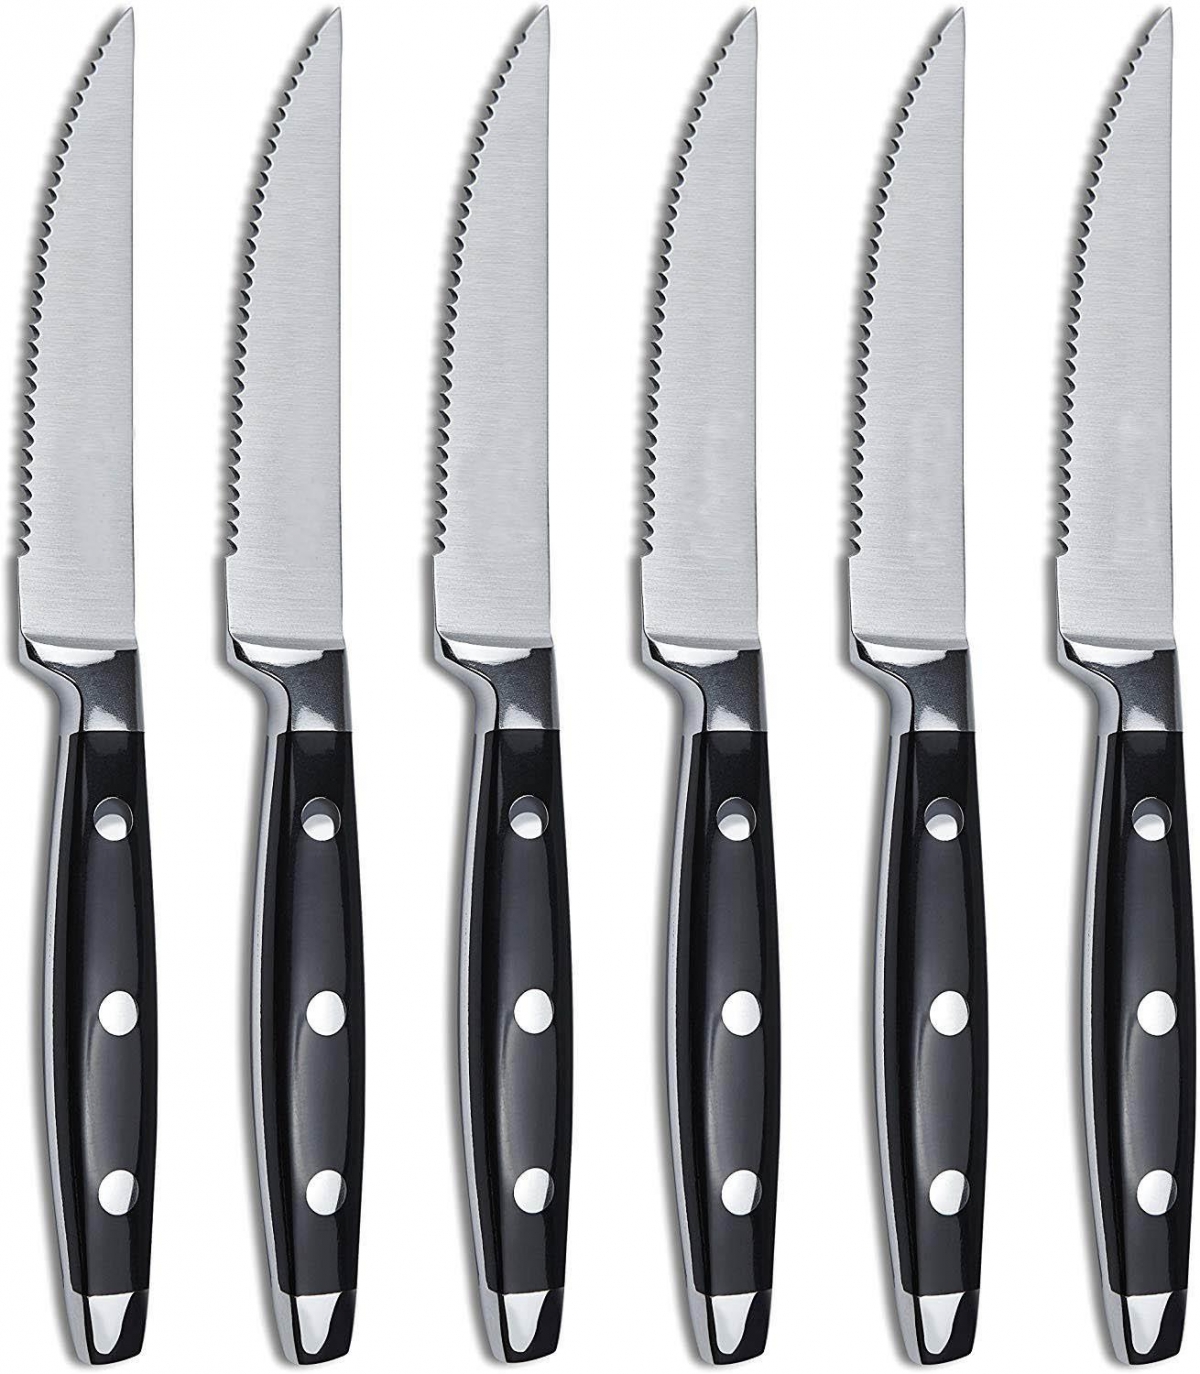 Should I paid the sample cost to Wholesale Metal Knife,Stainless Steel Knife,Quality Knife Manufacturers for custom Bulk buy order-ZX | kitchen knife,Kitchen tools,Silicone Cake Mould,Cutting Board,Baking Tool Sets,Chef Knife,Steak Knife,Slicer knife,Utility Knife,Paring Knife,Knife block,Knife Stand,Santoku Knife,toddler Knife,Plastic Knife,Non Stick Painting Knife,Colorful Knife,Stainless Steel Knife,Can opener,bottle Opener,Tea Strainer,Grater,Egg Beater,Nylon Kitchen tool,Silicone Kitchen Tool,Cookie Cutter,Cooking Knife Set,Knife Sharpener,Peeler,Cake Knife,Cheese Knife,Pizza Knife,Silicone Spatular,Silicone Spoon,Food Tong,Forged knife,Kitchen Scissors,cake baking knives,Children’s Cooking knives,Carving Knife